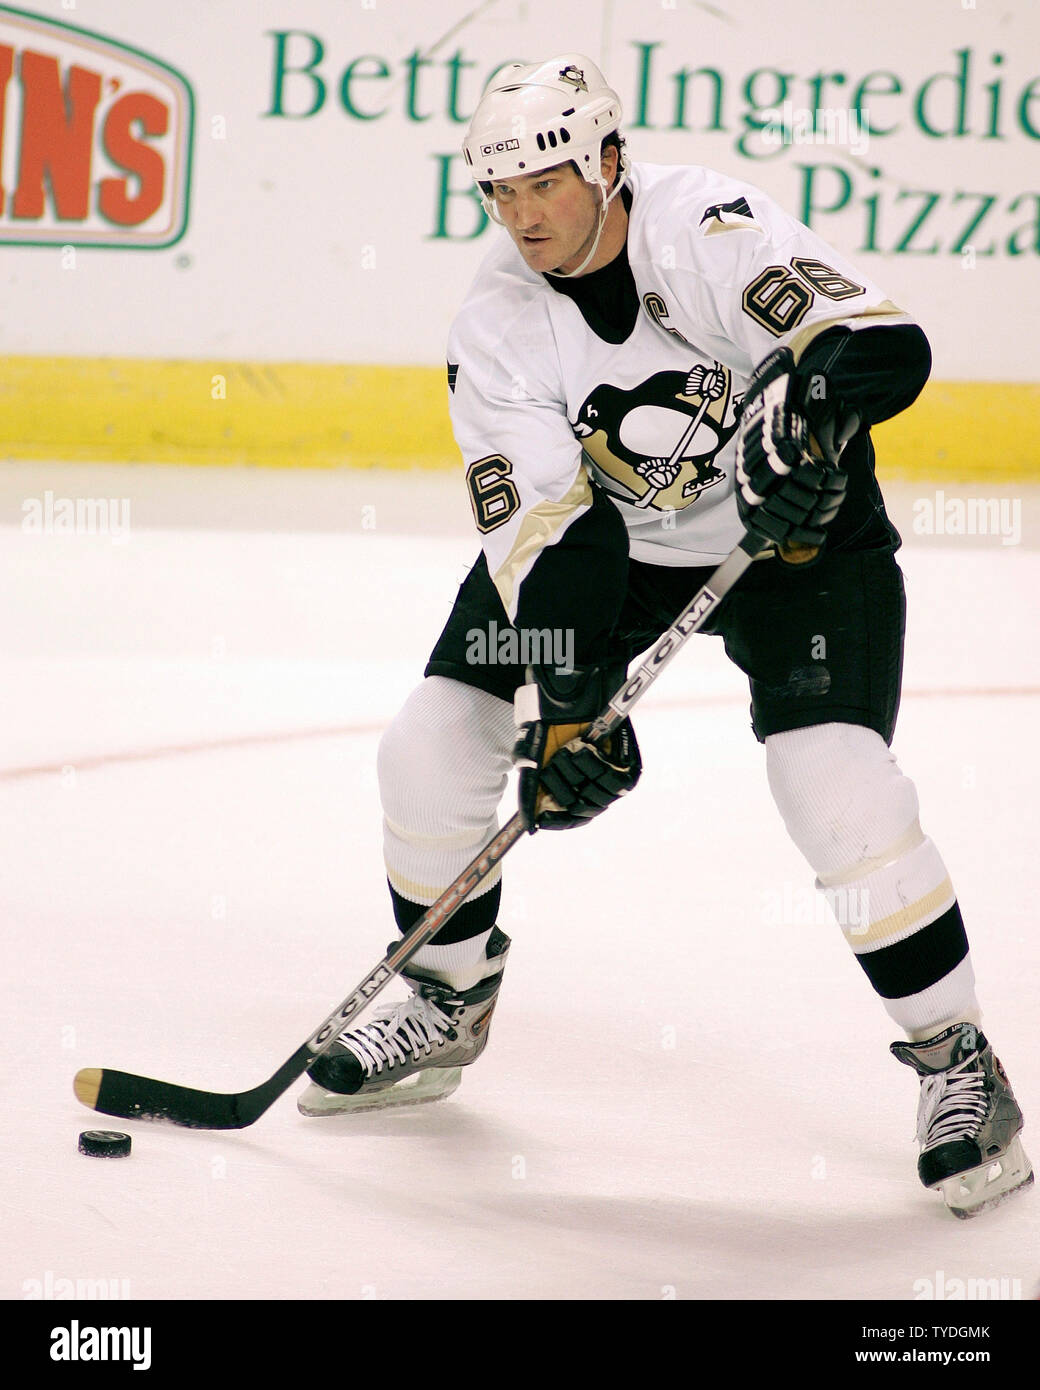 NHL: Owner Mario Lemieux has Penguins well-positioned for run at three-peat